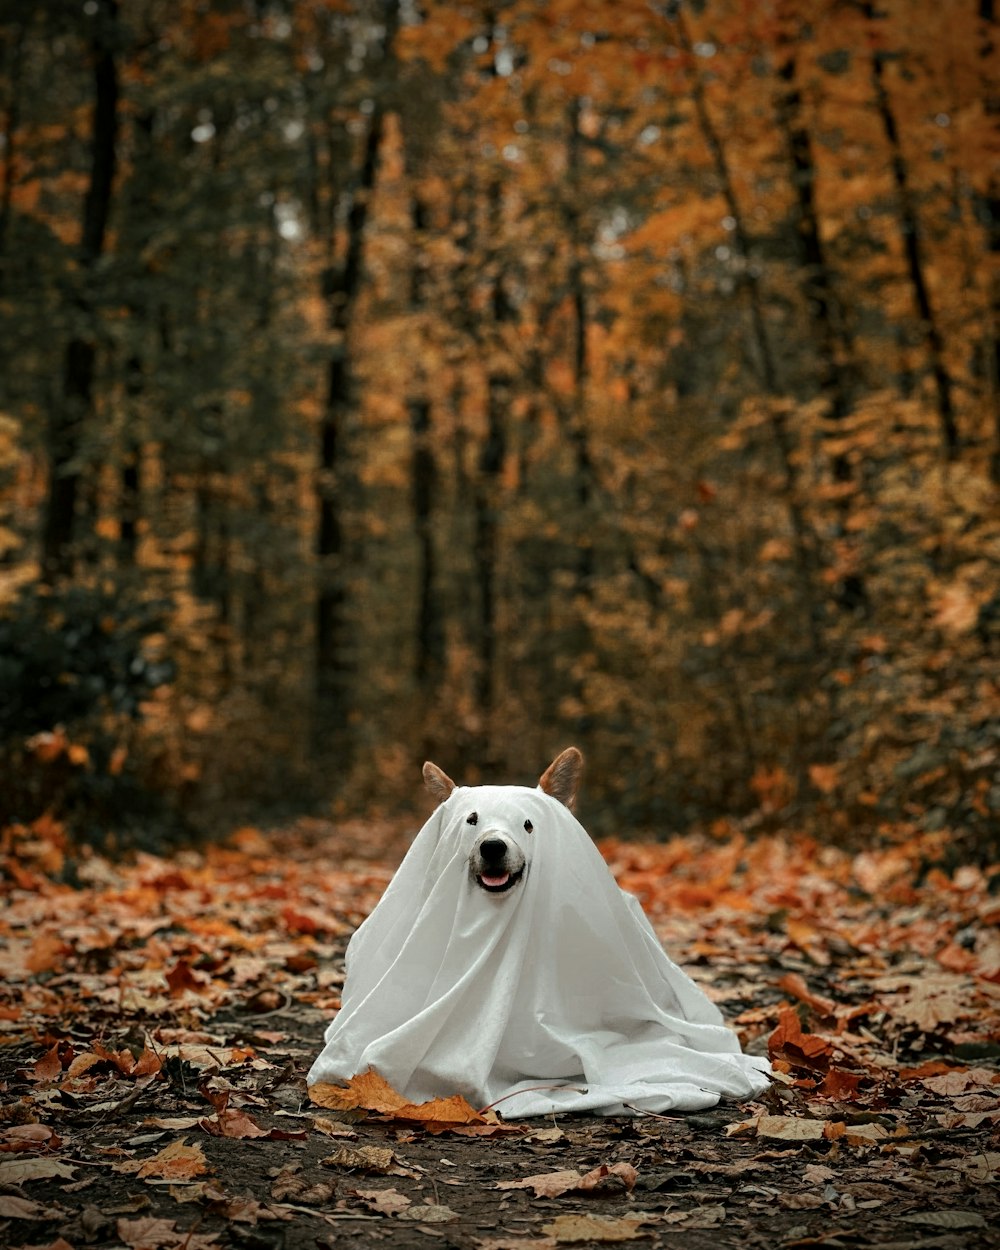 a white dog covered in a white cloth in a forest